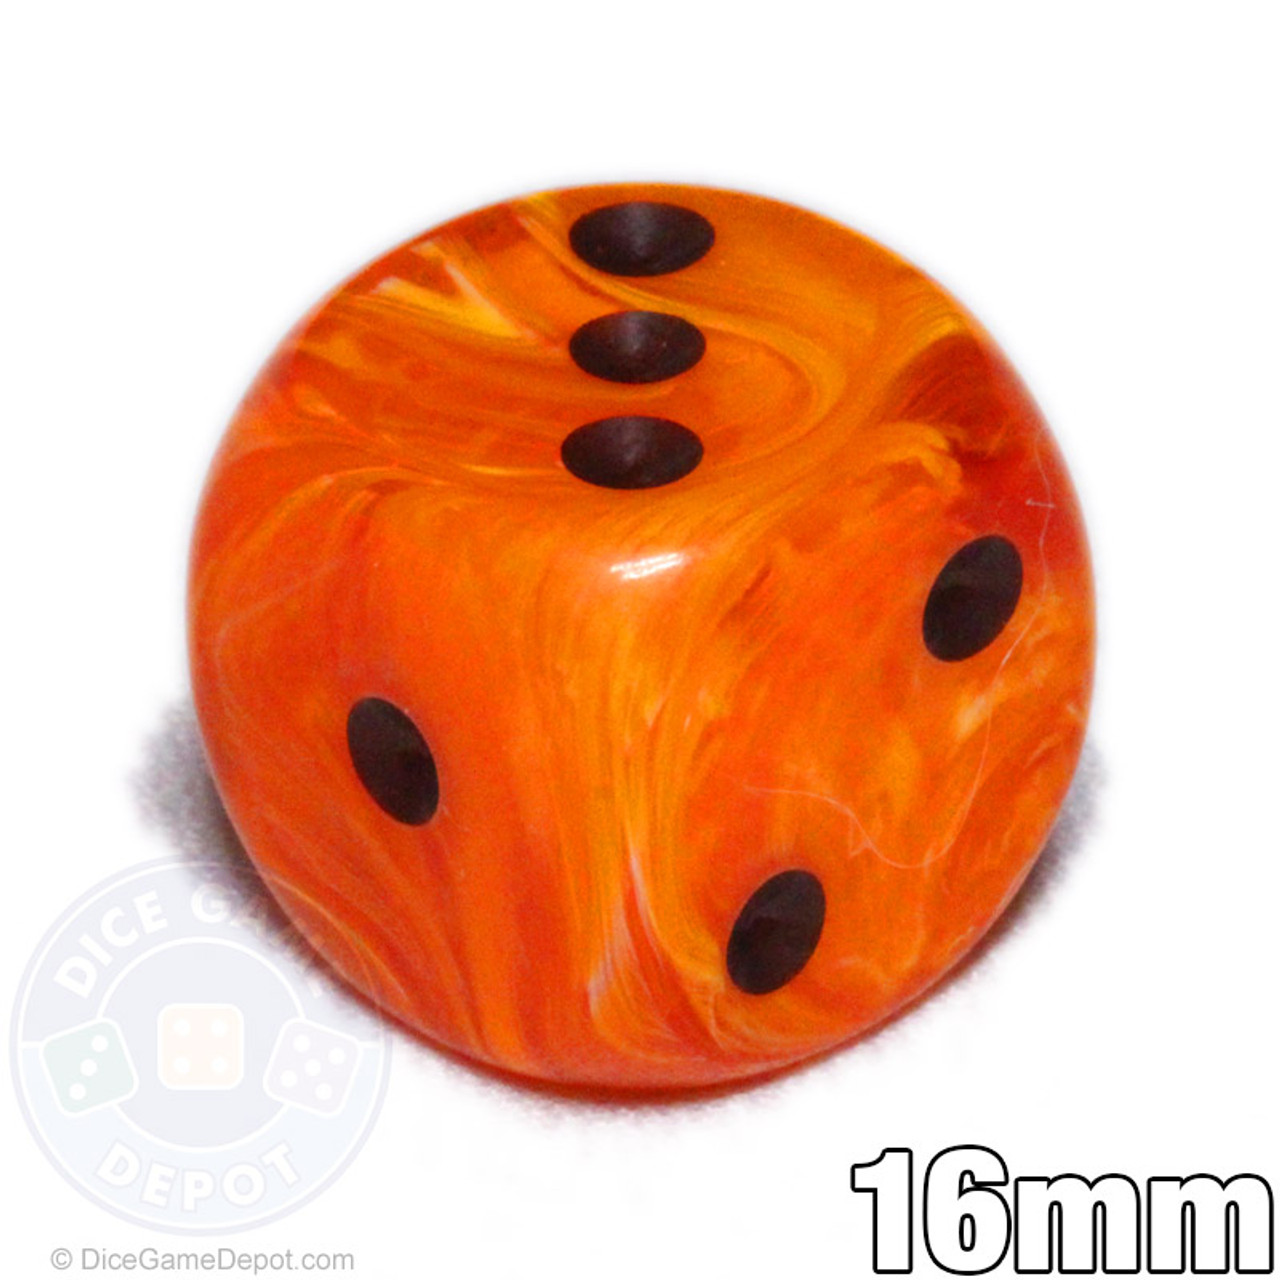 DICE 5 SIX-SIDED D6 STANDARD 16mm ORANGE POUCH BLACK WITH MULTI-COLOR PIPS